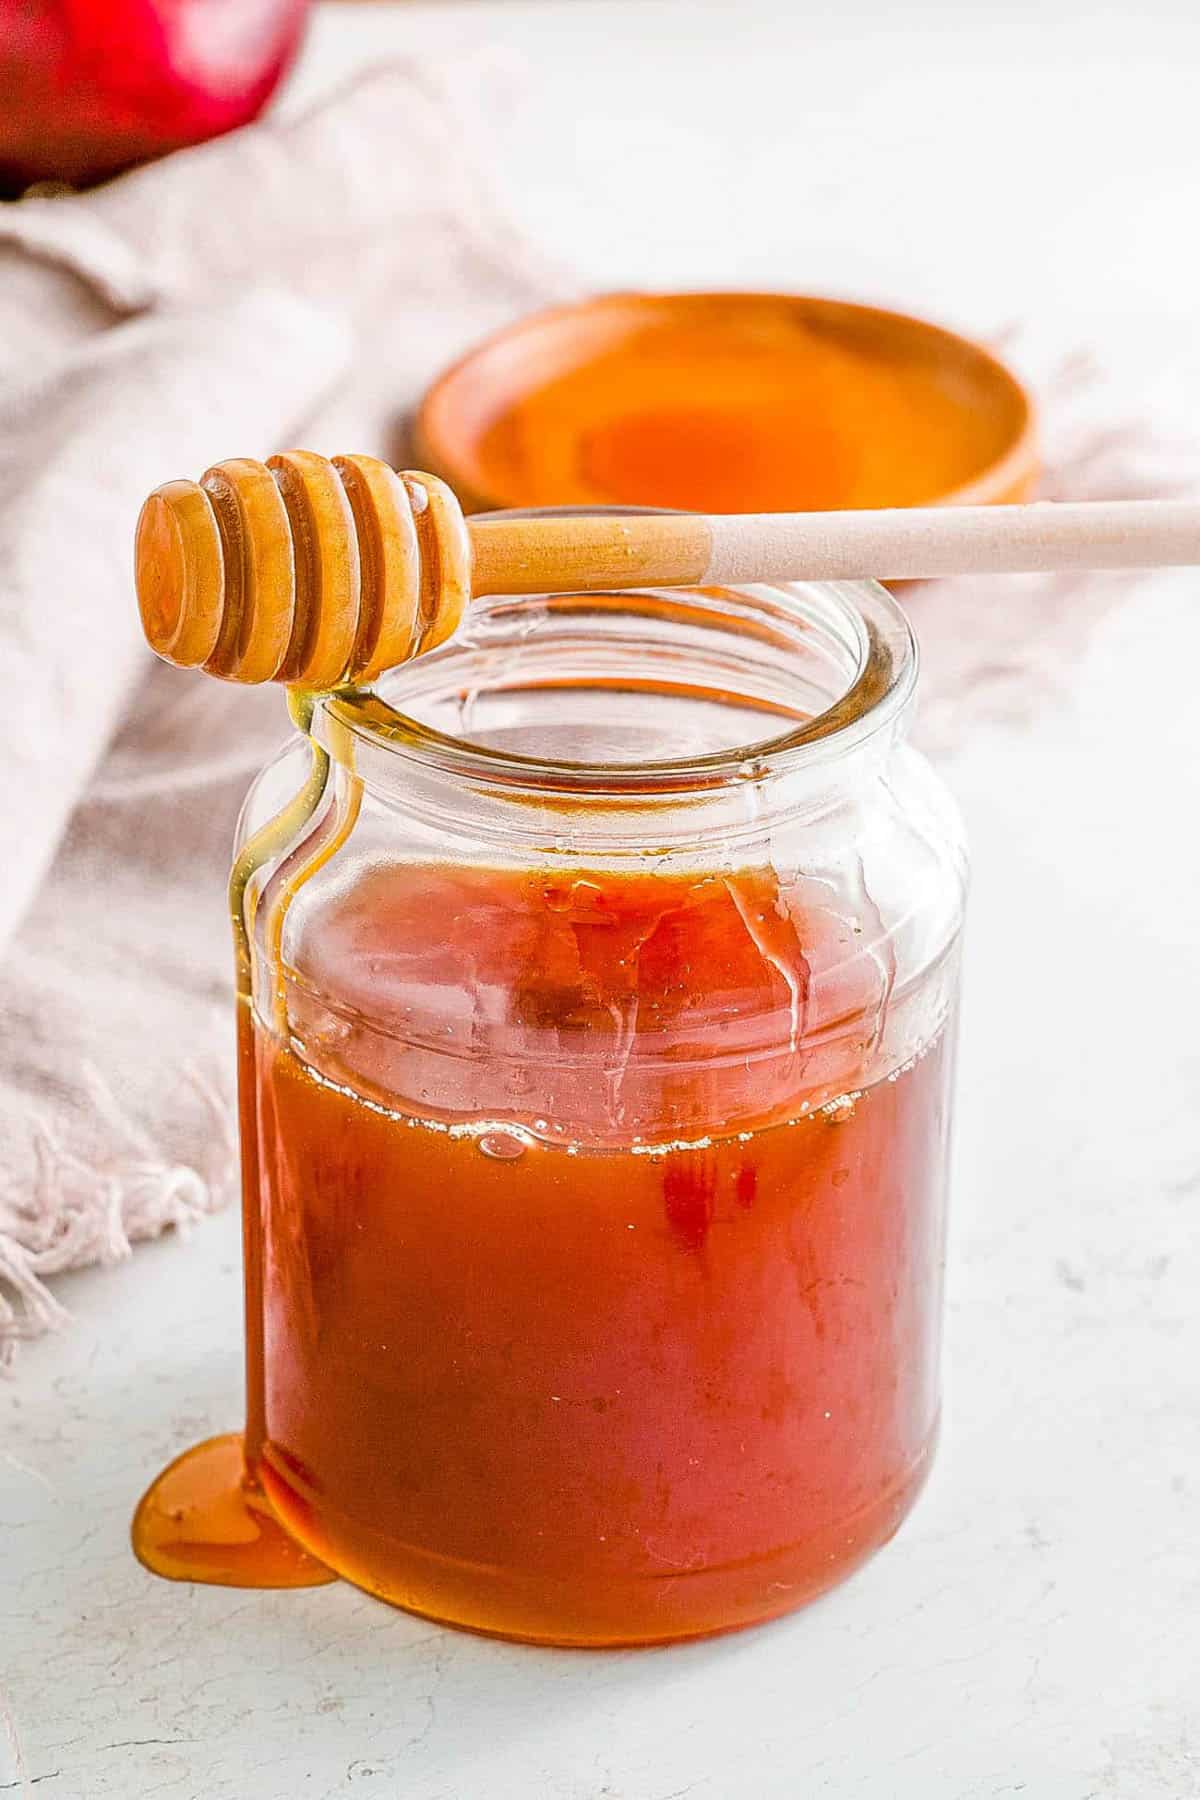 Jar of bee free honey with a honey dipper balanced on top.